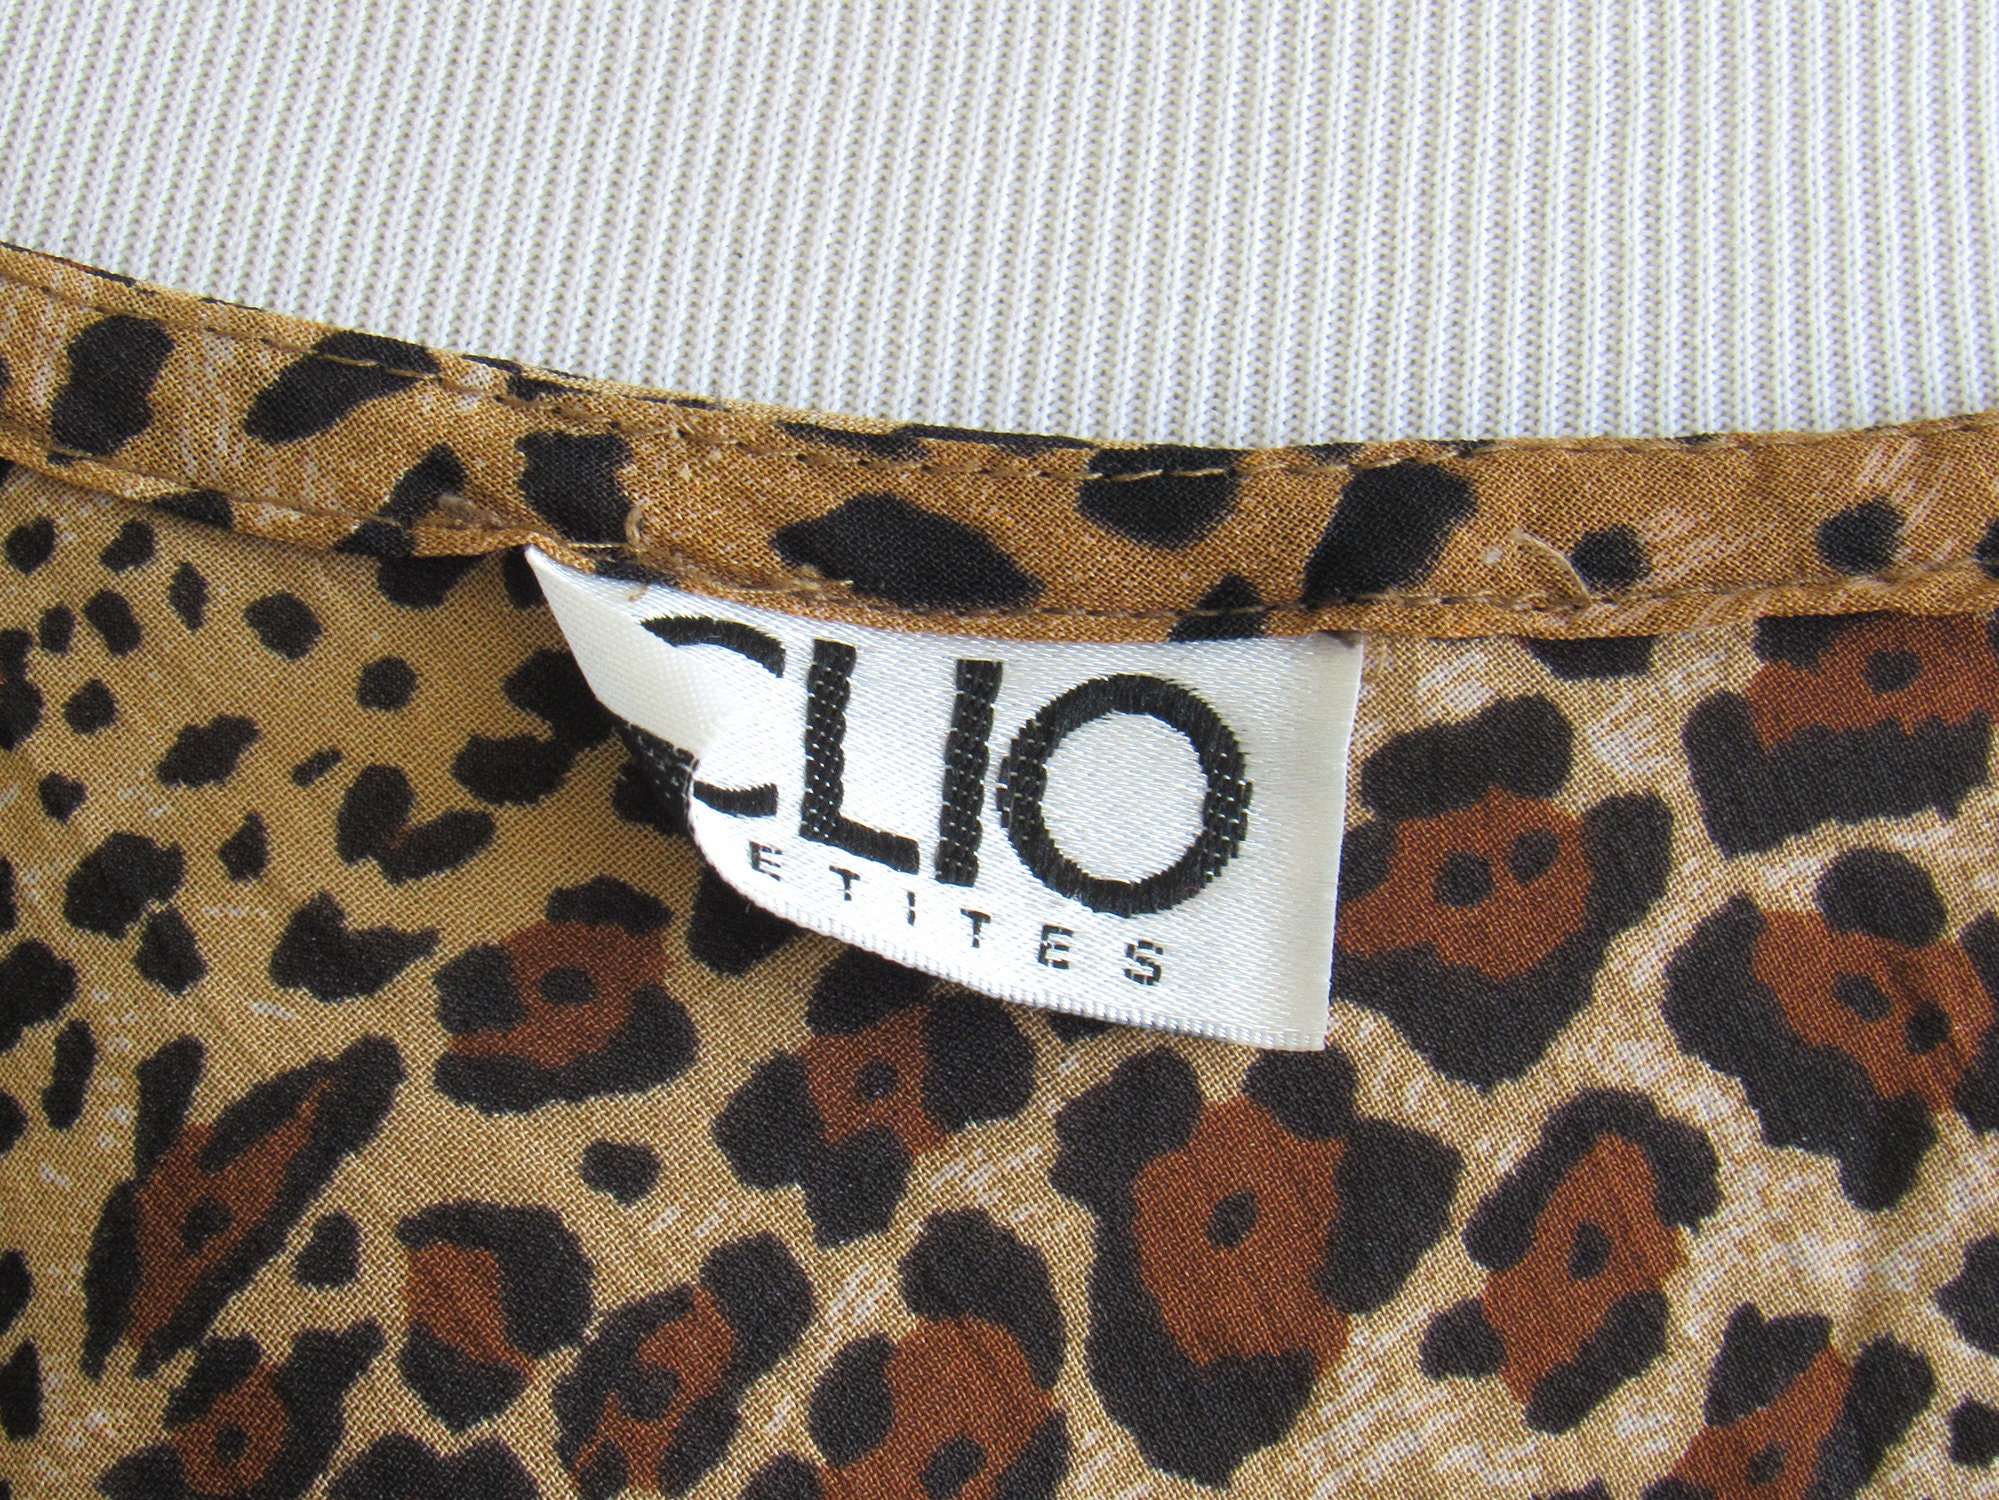 90s Cheetah Print Blouse With Flowing Bell Sleeves Draped - Etsy